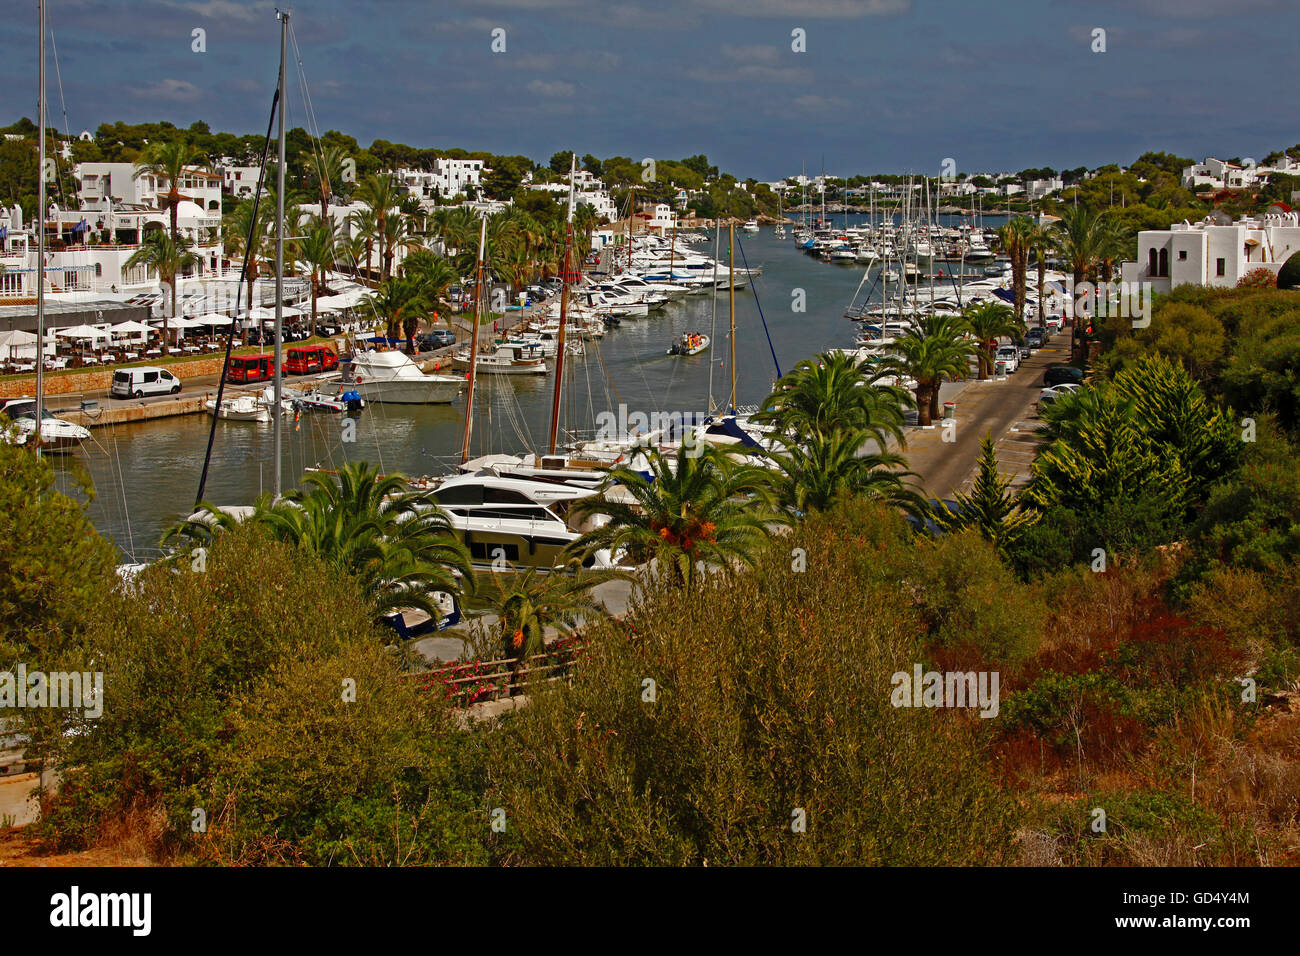 Cala D'or High Resolution Stock Photography and Images - Alamy